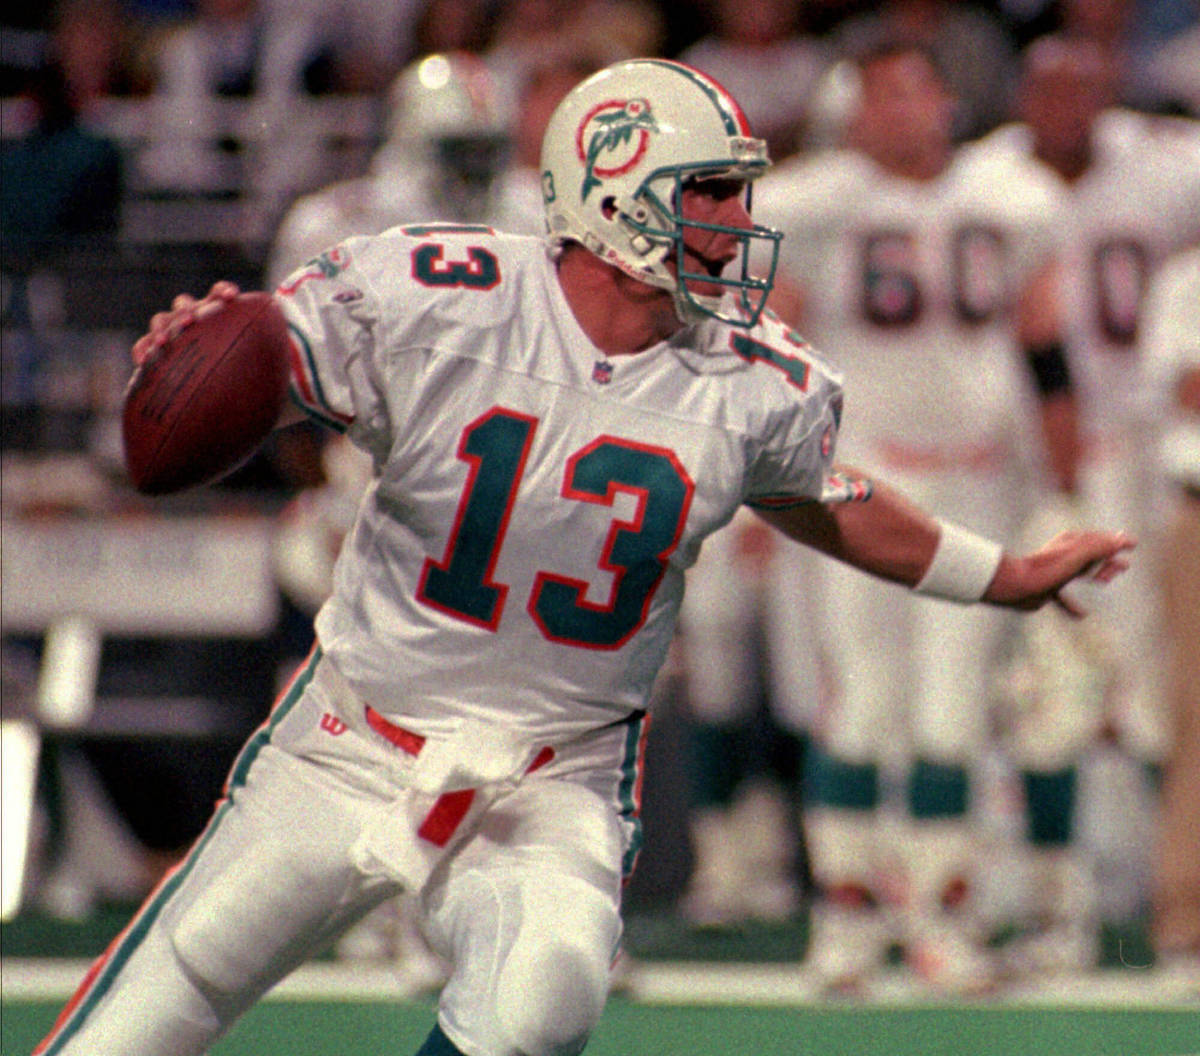 File-This Dec. 24, 1995, file photo shows Miami Dolphins quarterback Dan Marino looking for the ...